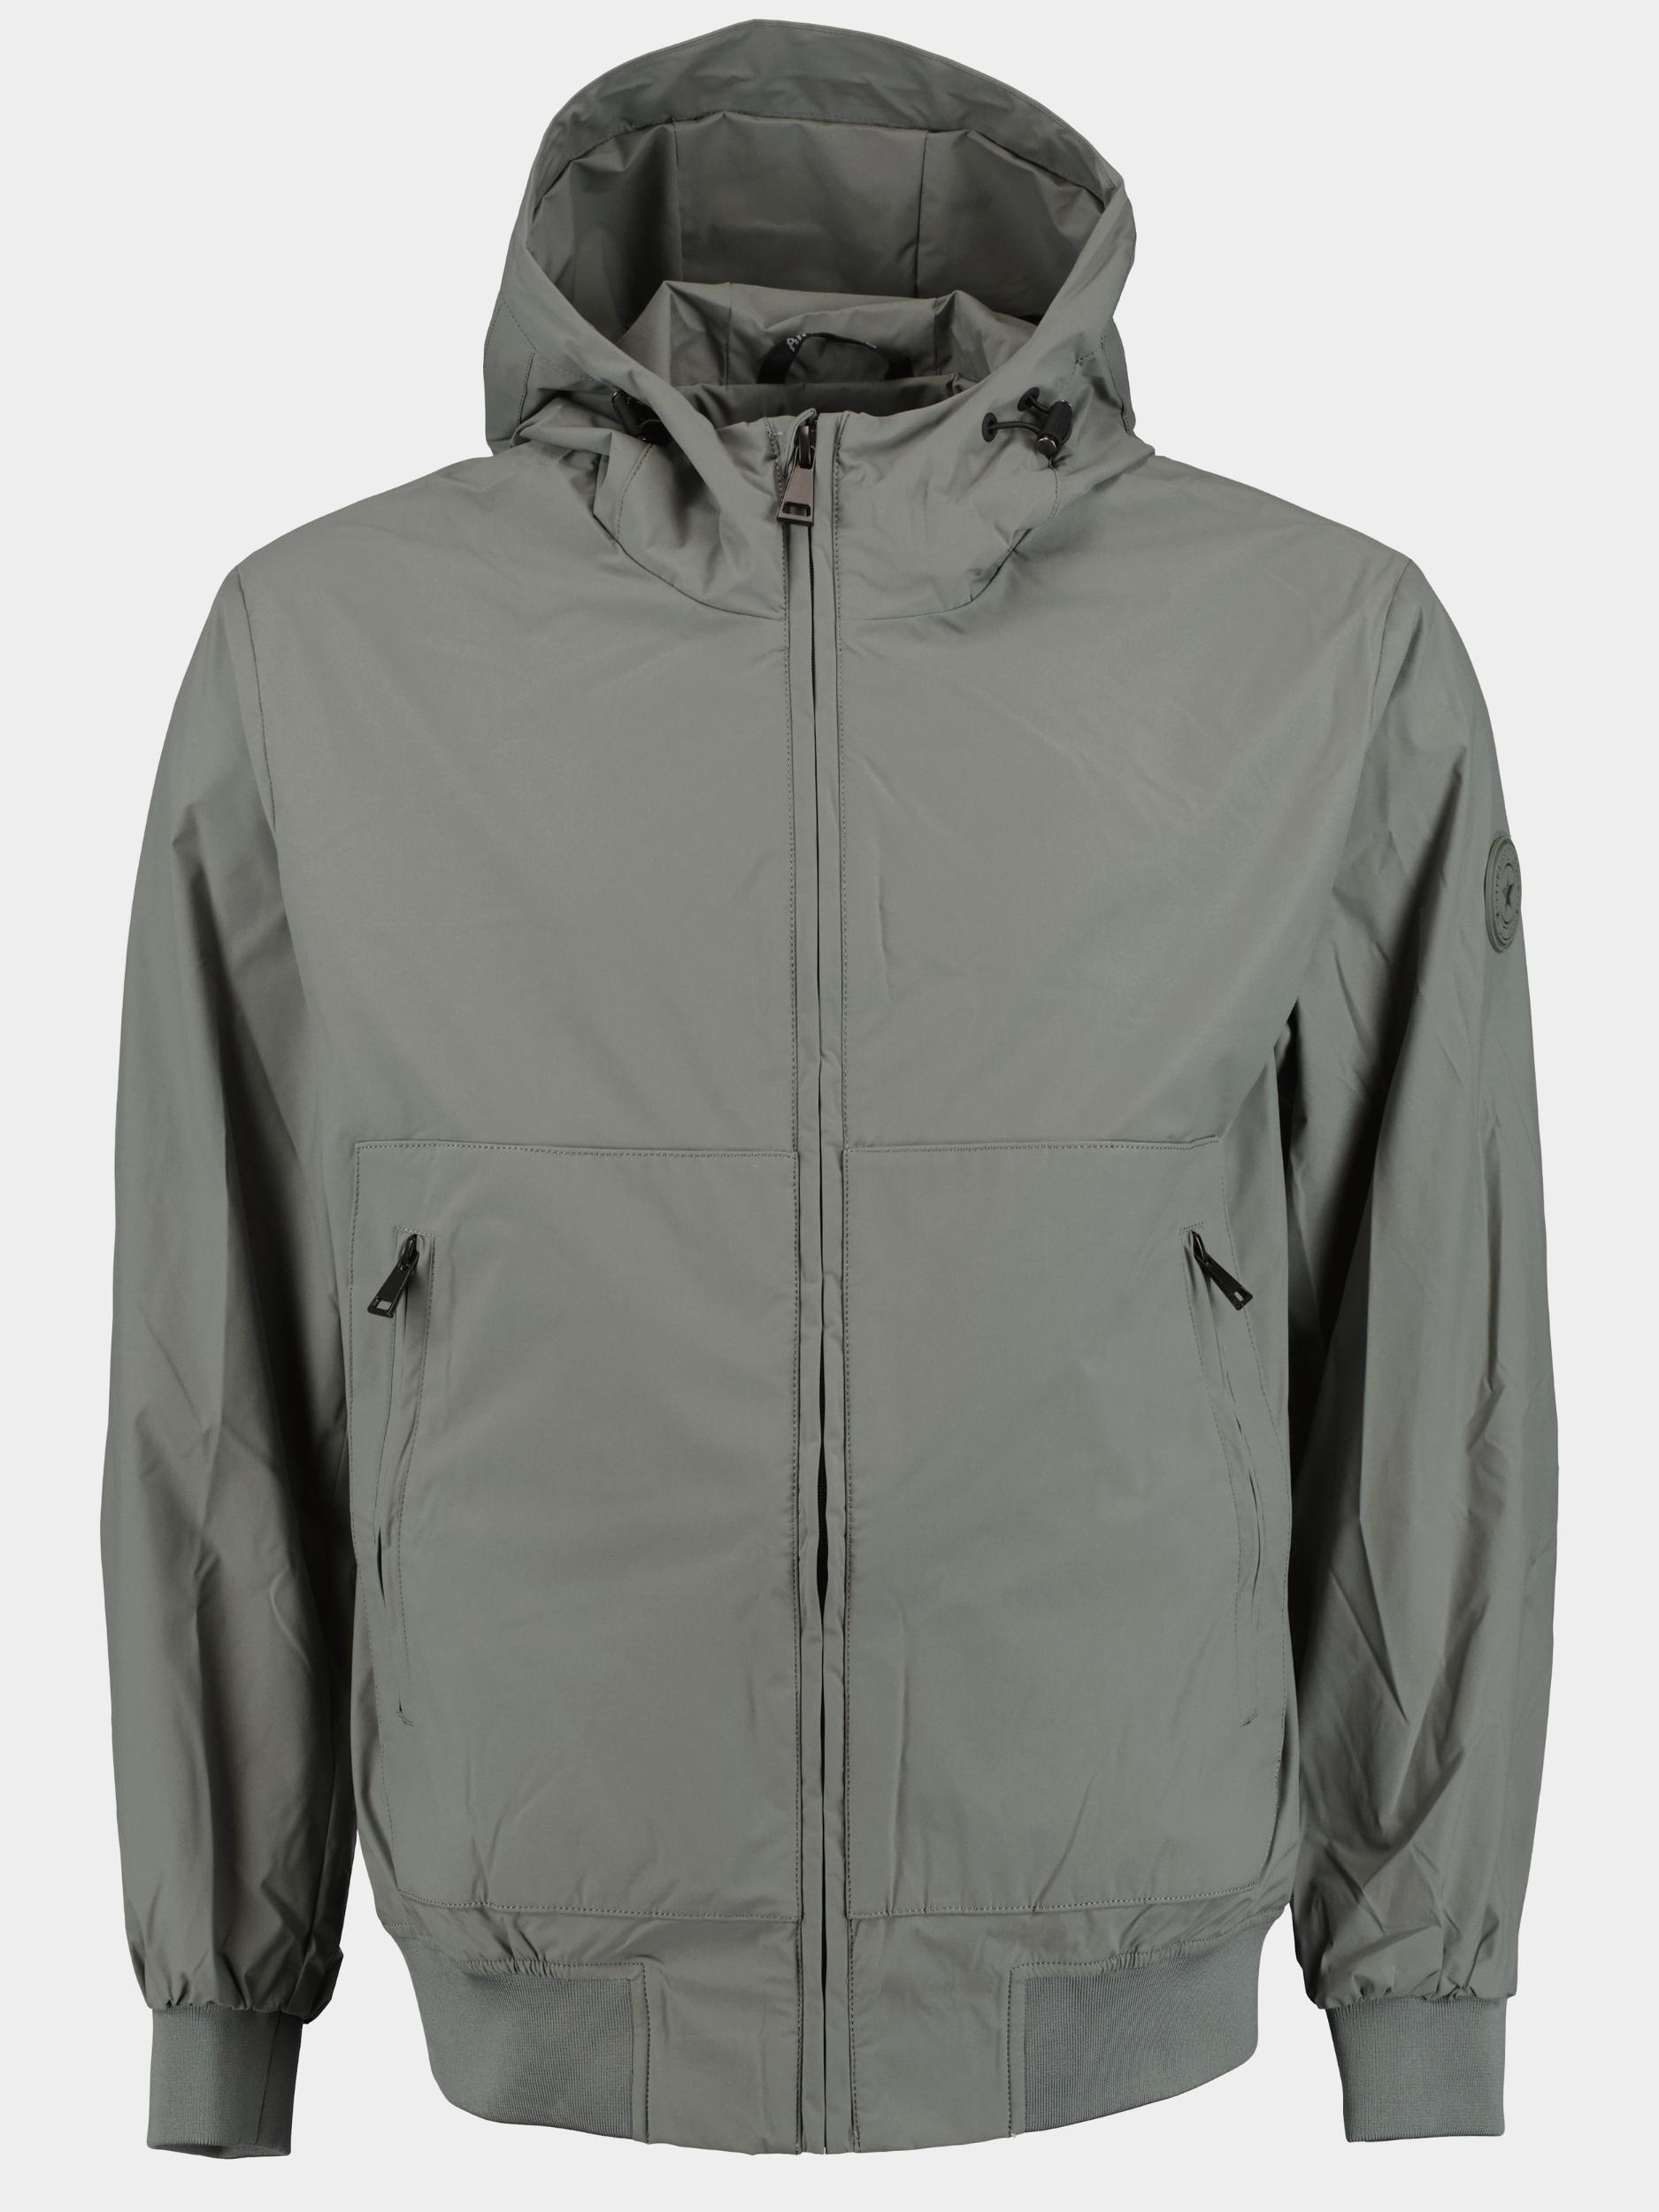 Afbeelding van Airforce Zomerjack hooded four-way stretch jacket frm0962/930